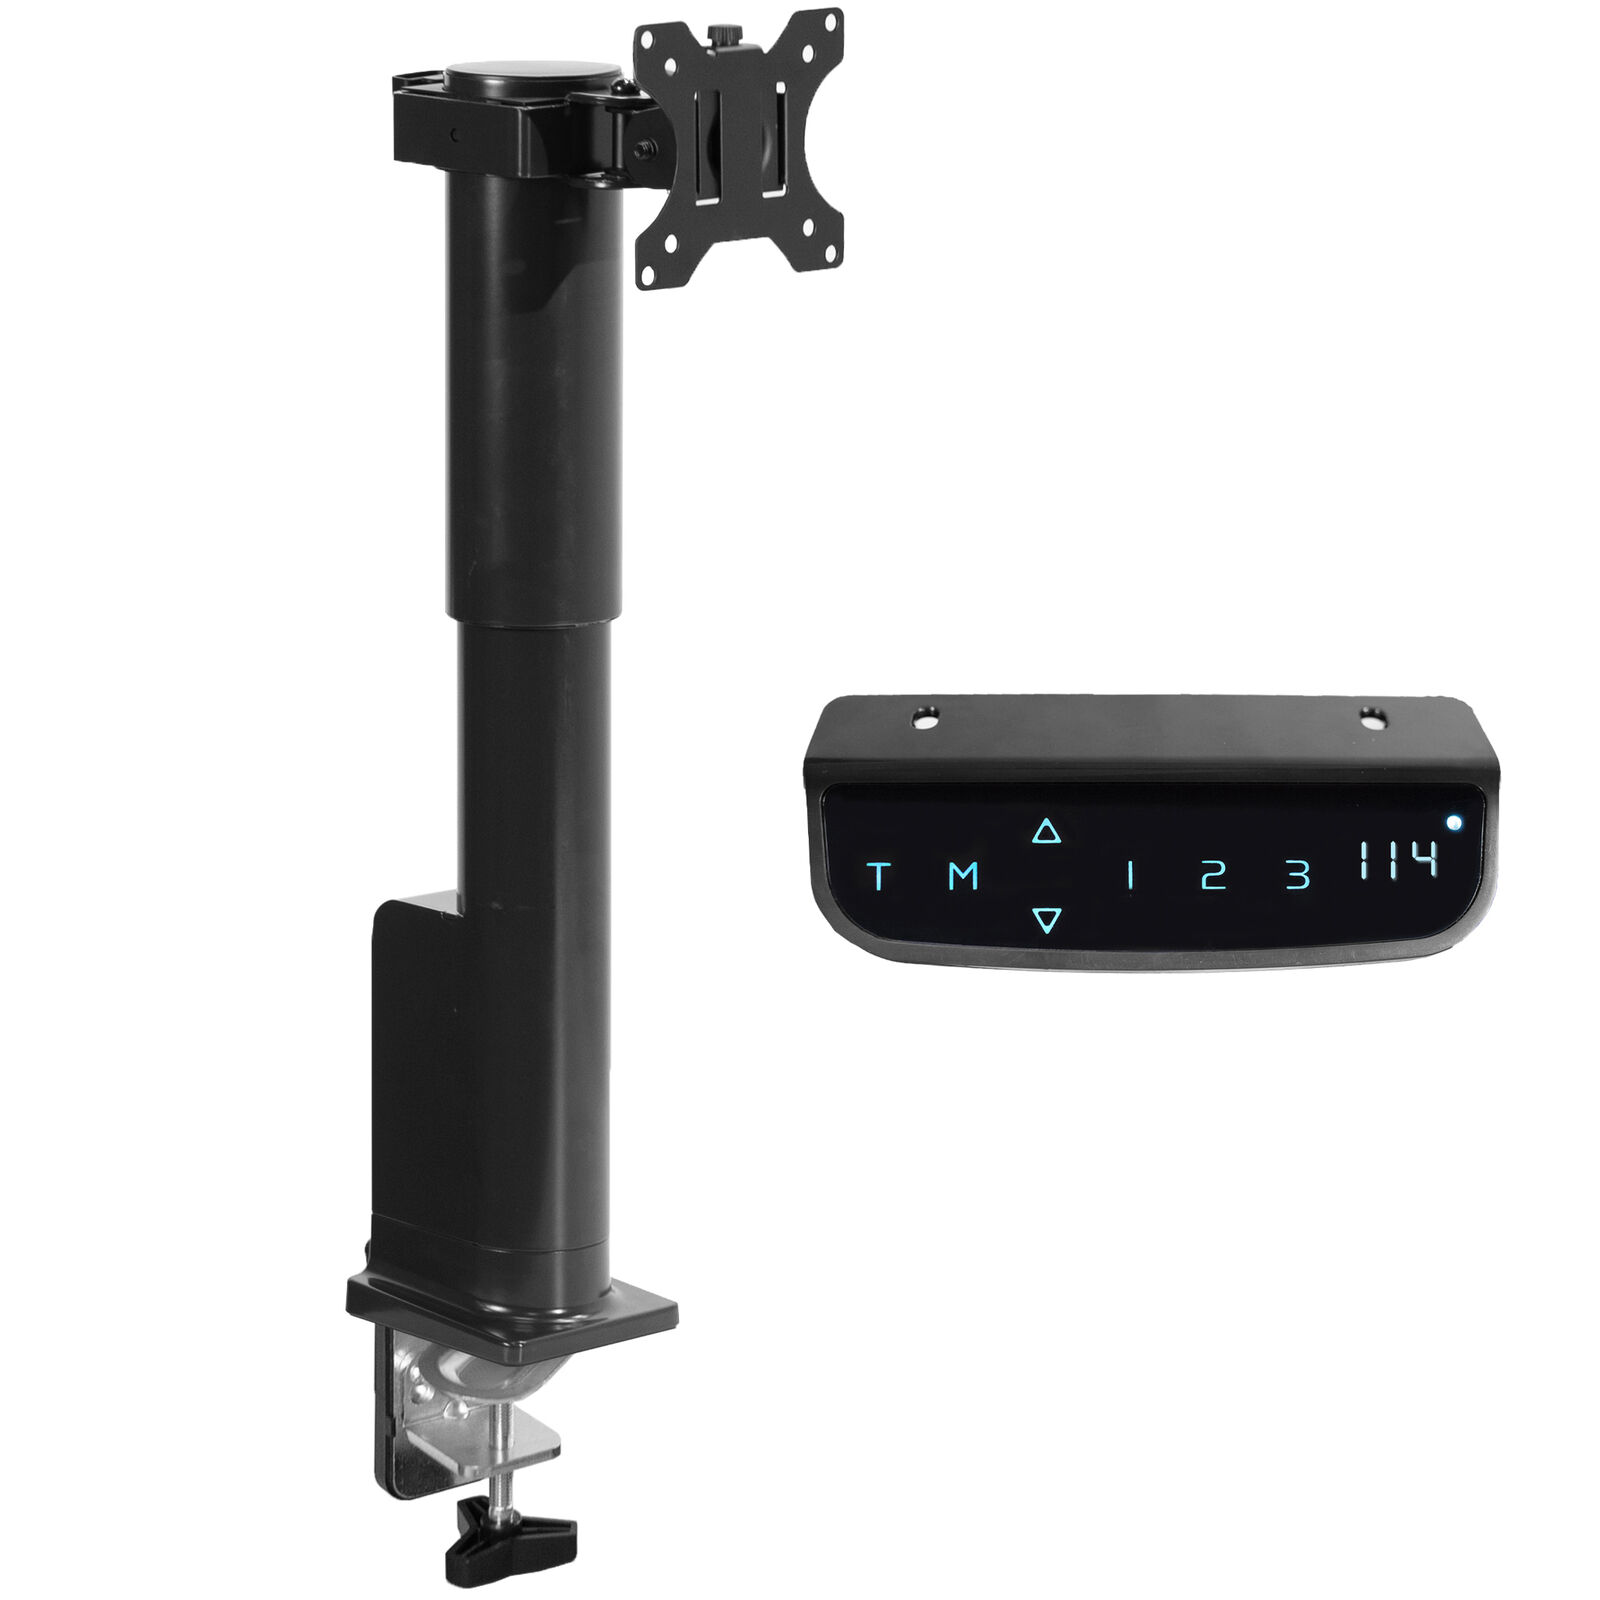 VIVO Electric Single Ultrawide Monitor Desk Mount with Touch Screen Controller